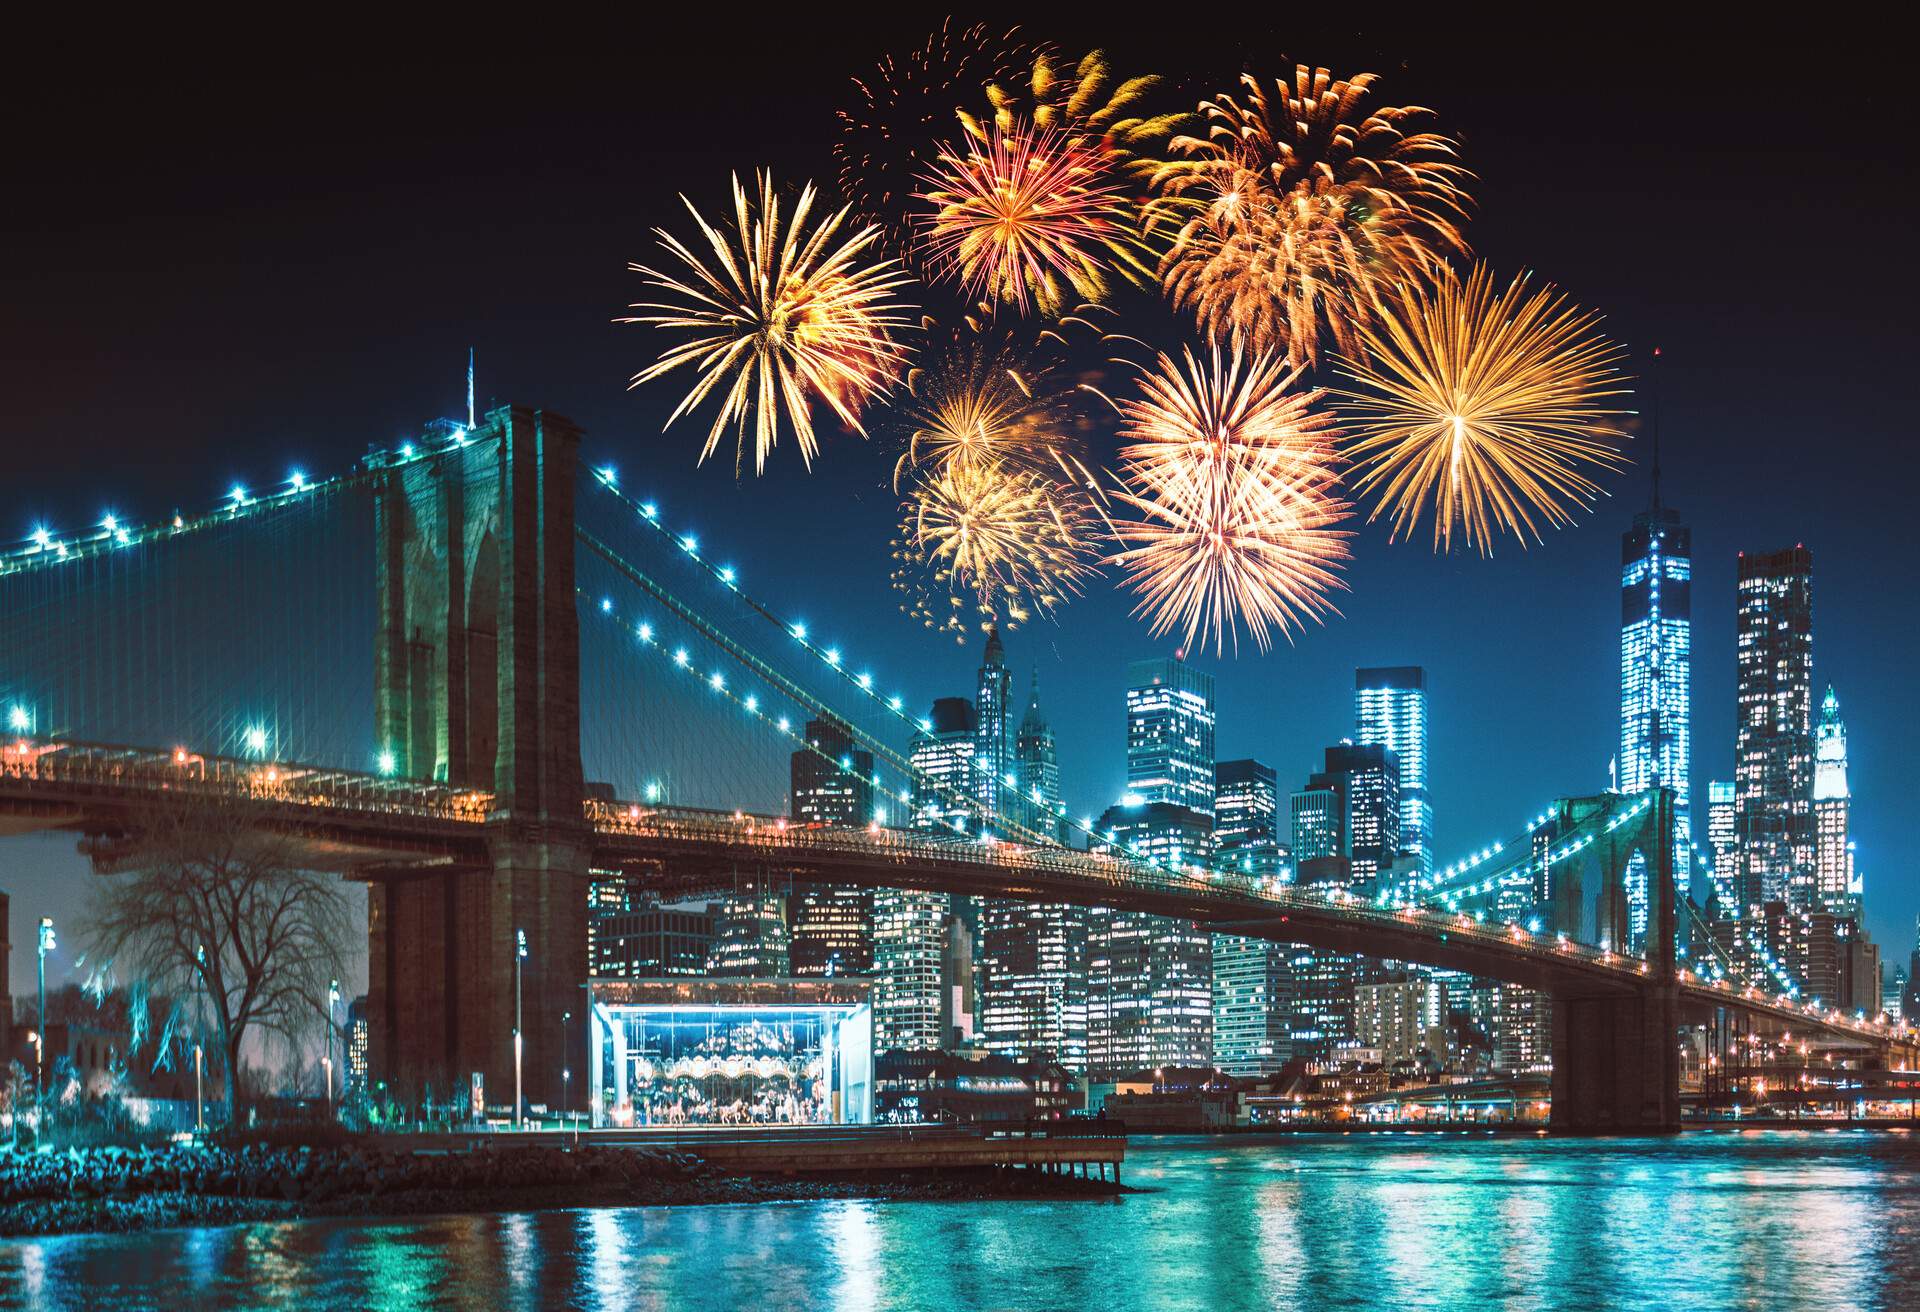 DEST_USA_NEW-YORK-CITY_FIREWORKS_NEW-YEARS_GettyImages-1085209072.jpg